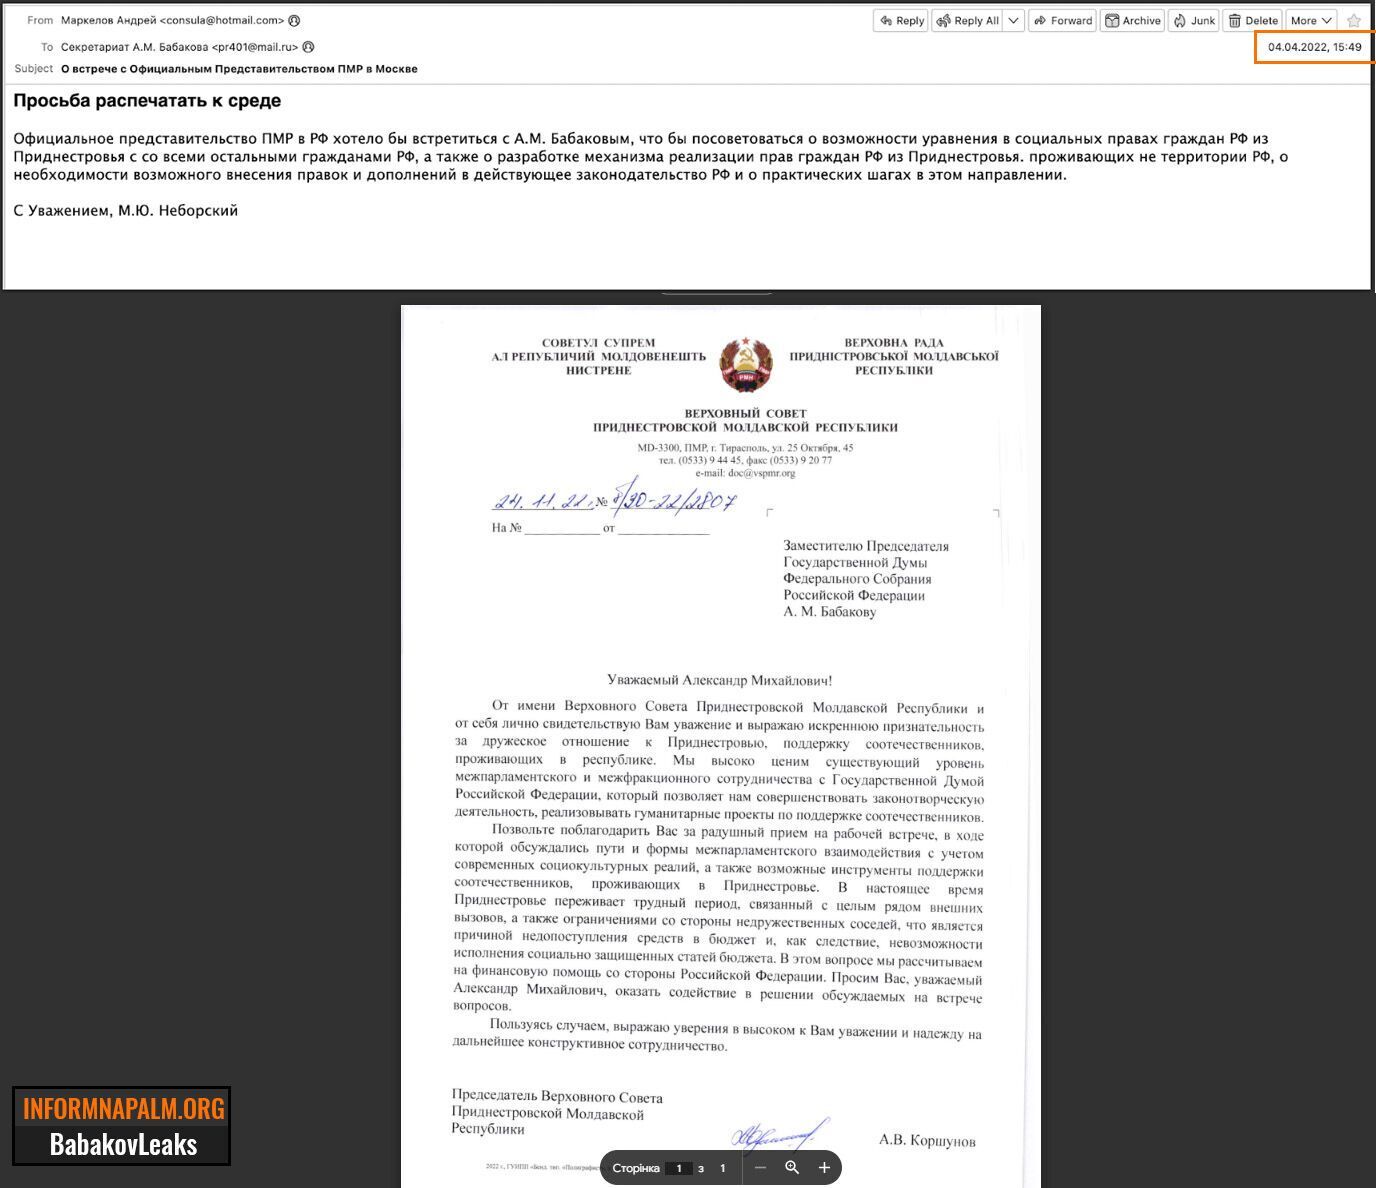 Laundering billions and a ''special task'' from the Kremlin: hackers cracked the mail of the Deputy Chairman of the State Duma and learned resonant details. Photo